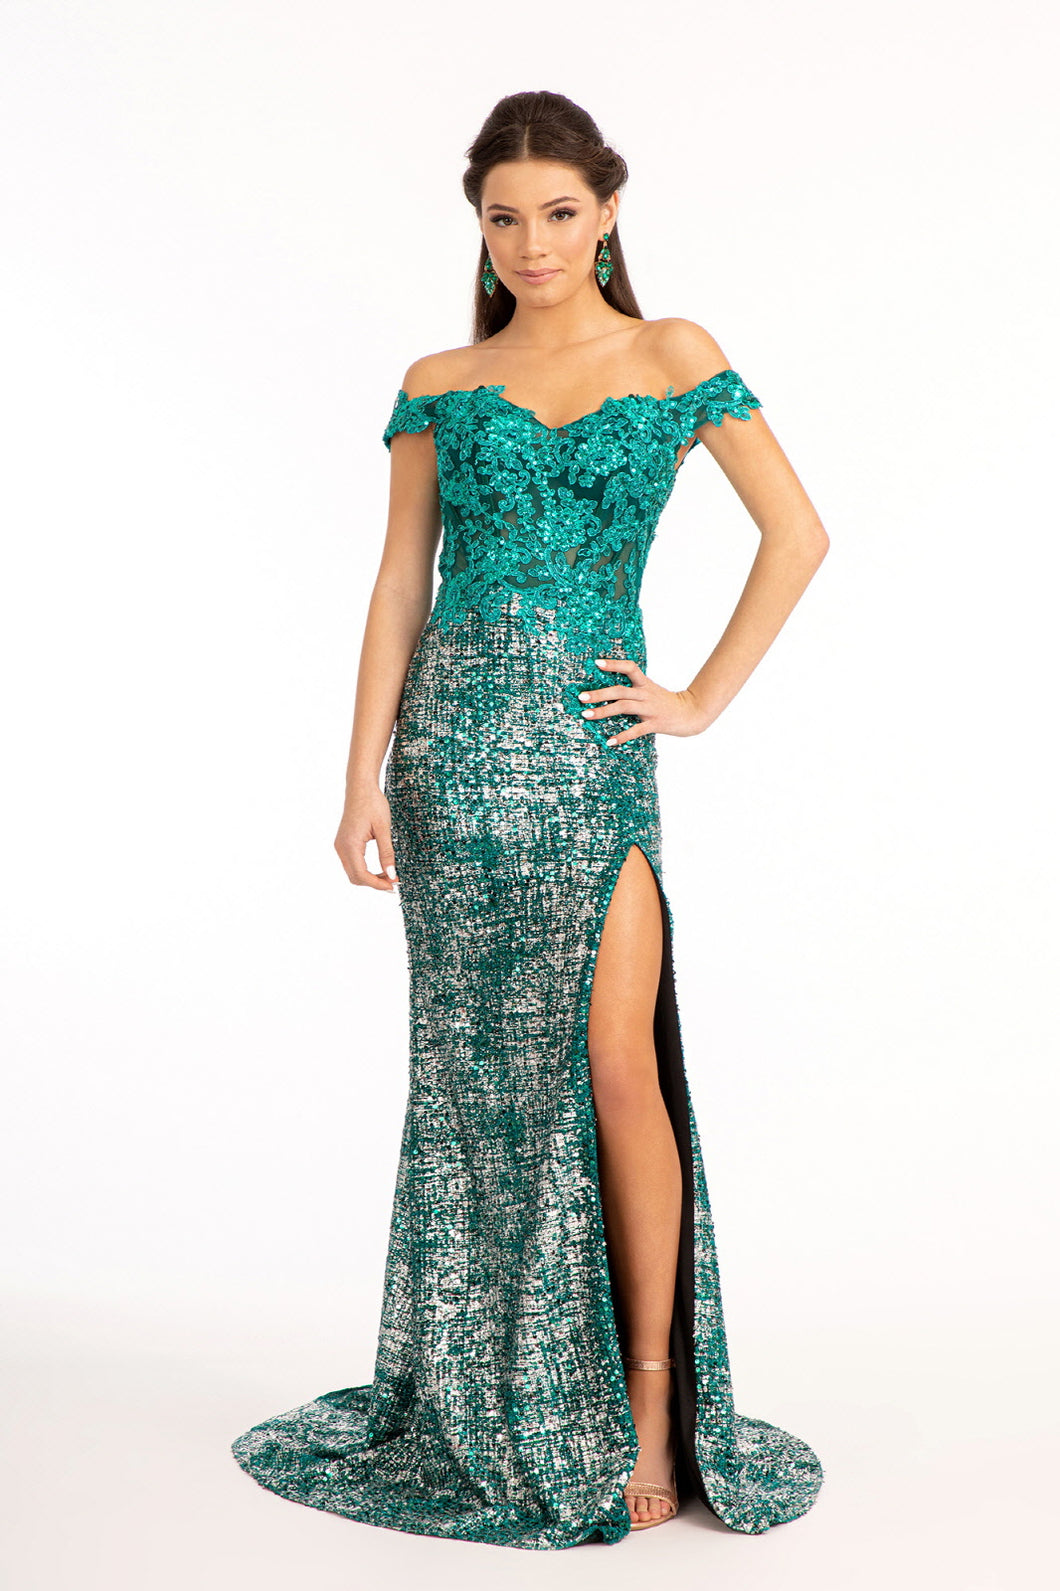 GL 3024 - Off The Shoulder Fit & Flare Prom Gown with Sheer Beaded Lace Embellished Bodice Open Lace Up Corset Back & Leg Slit Dresses GLS XS GREEN 